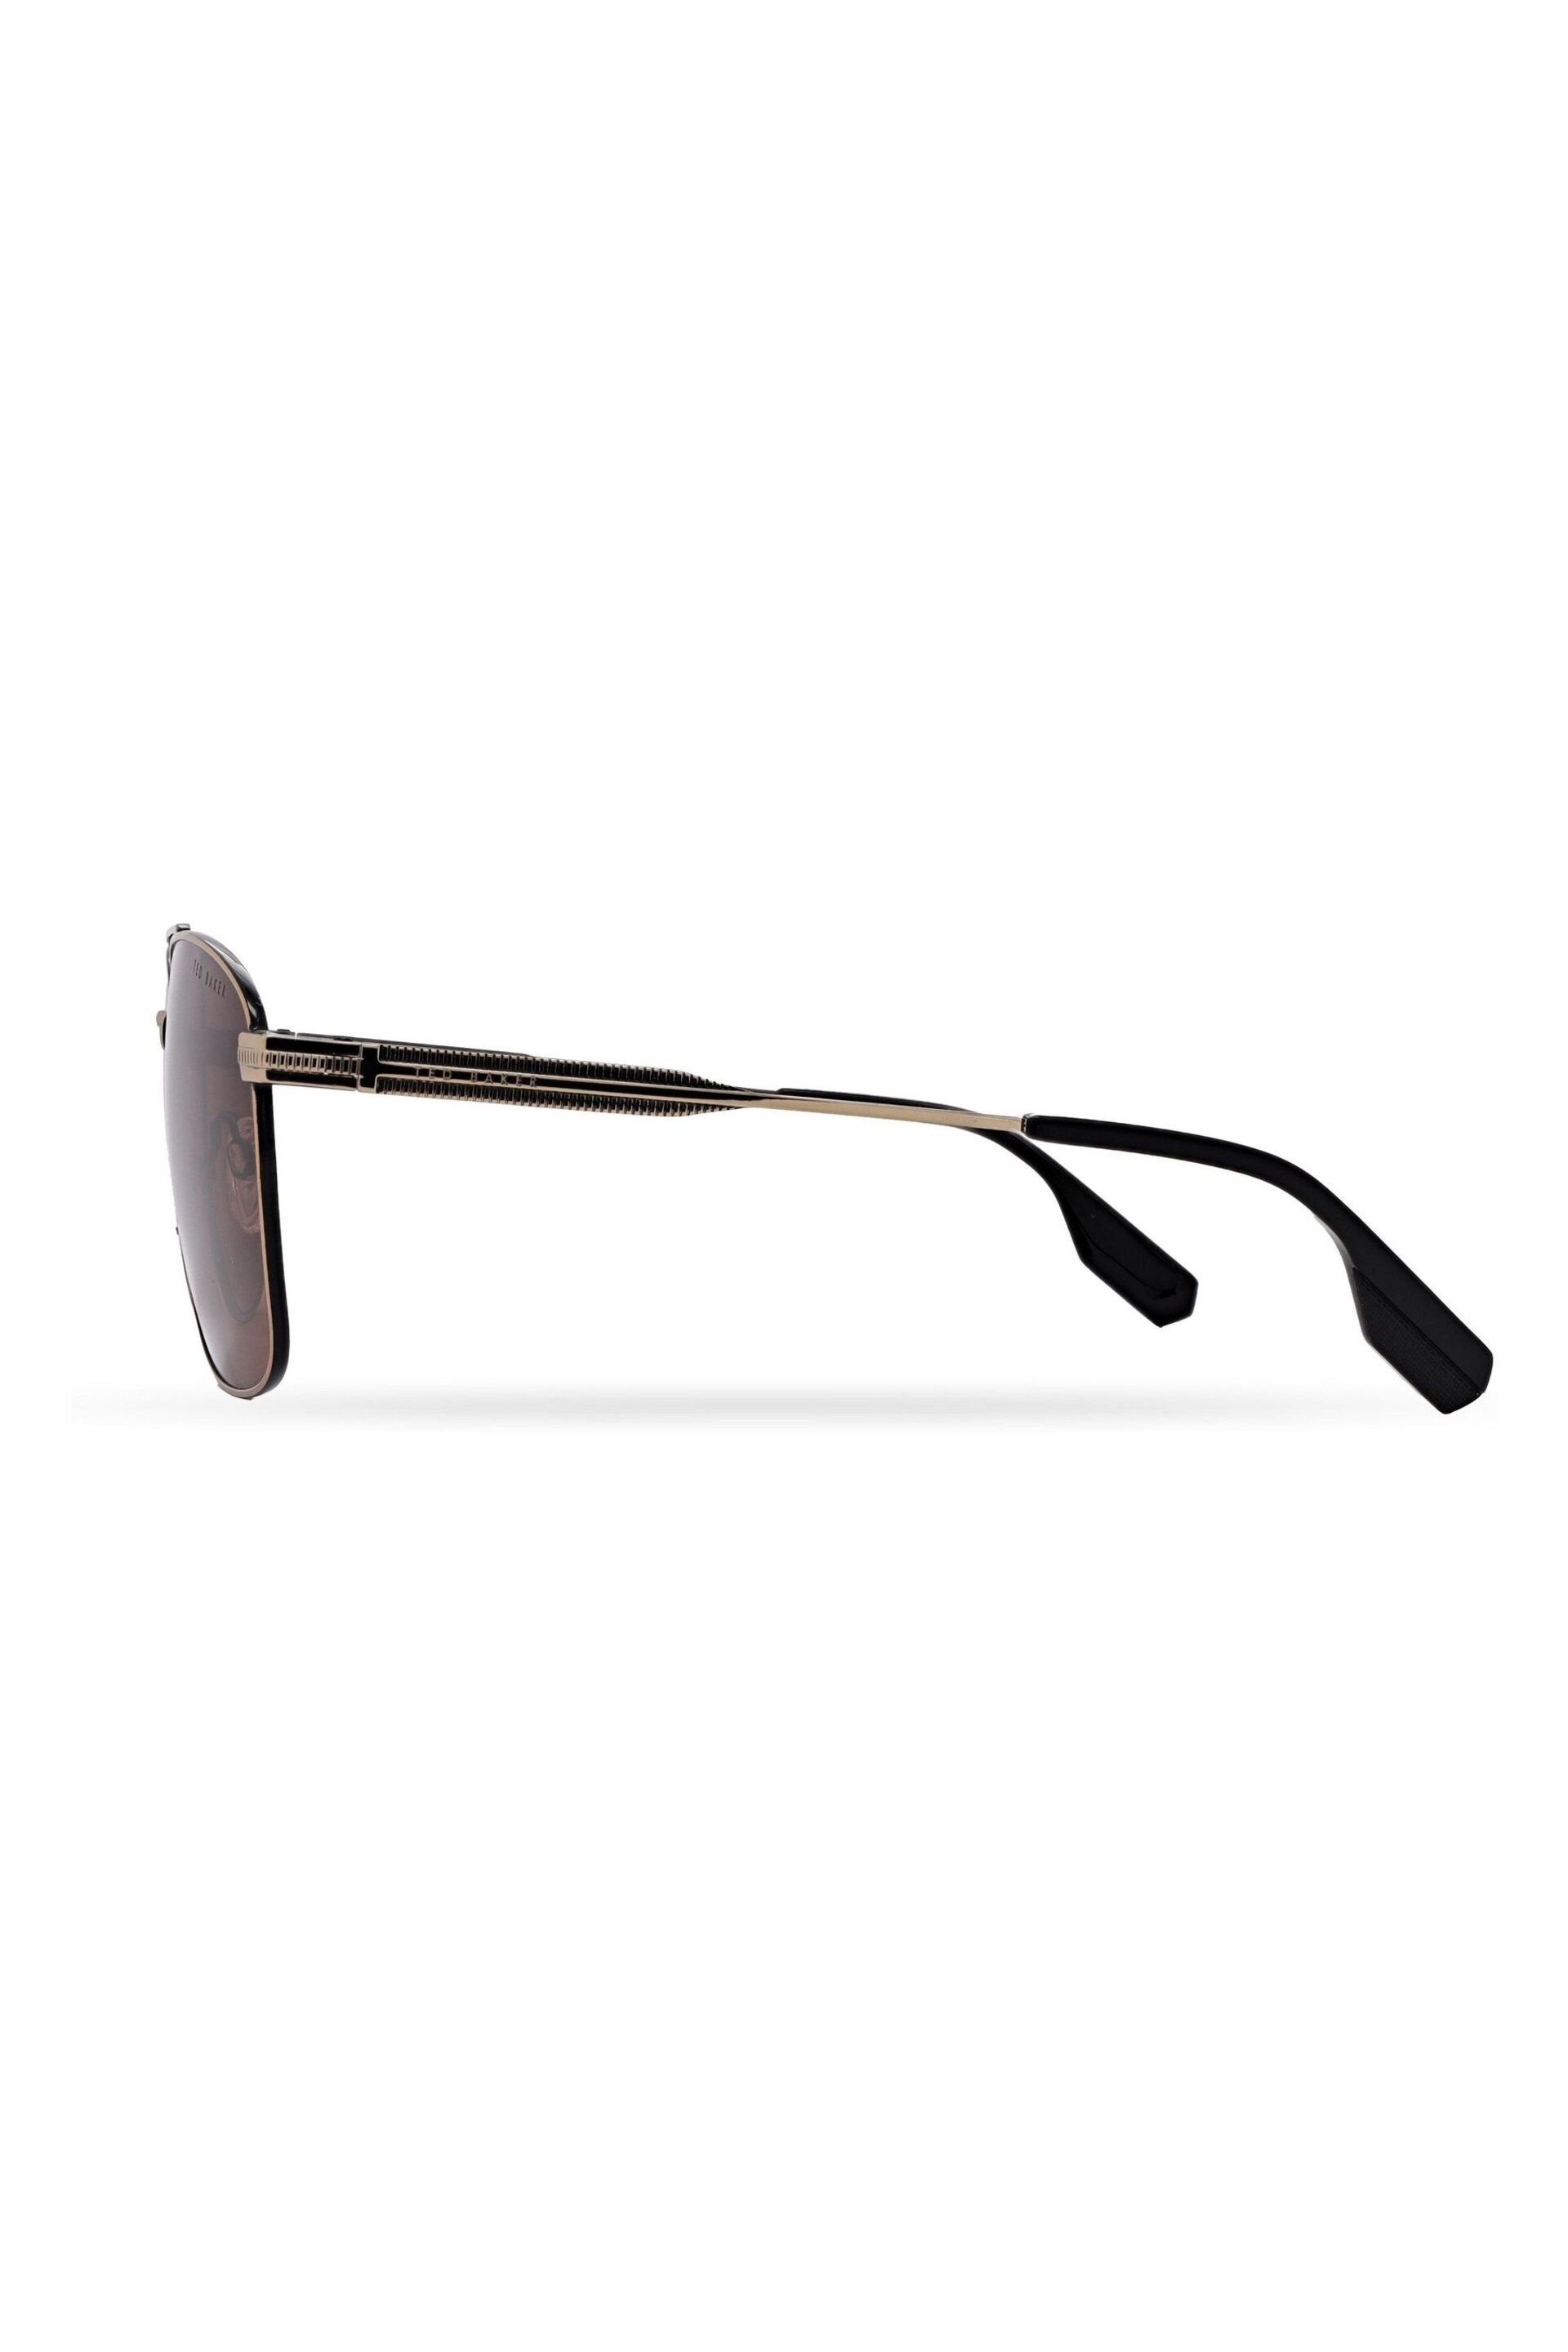 Ted Baker Gold Chase Sunglasses - Image 3 of 5